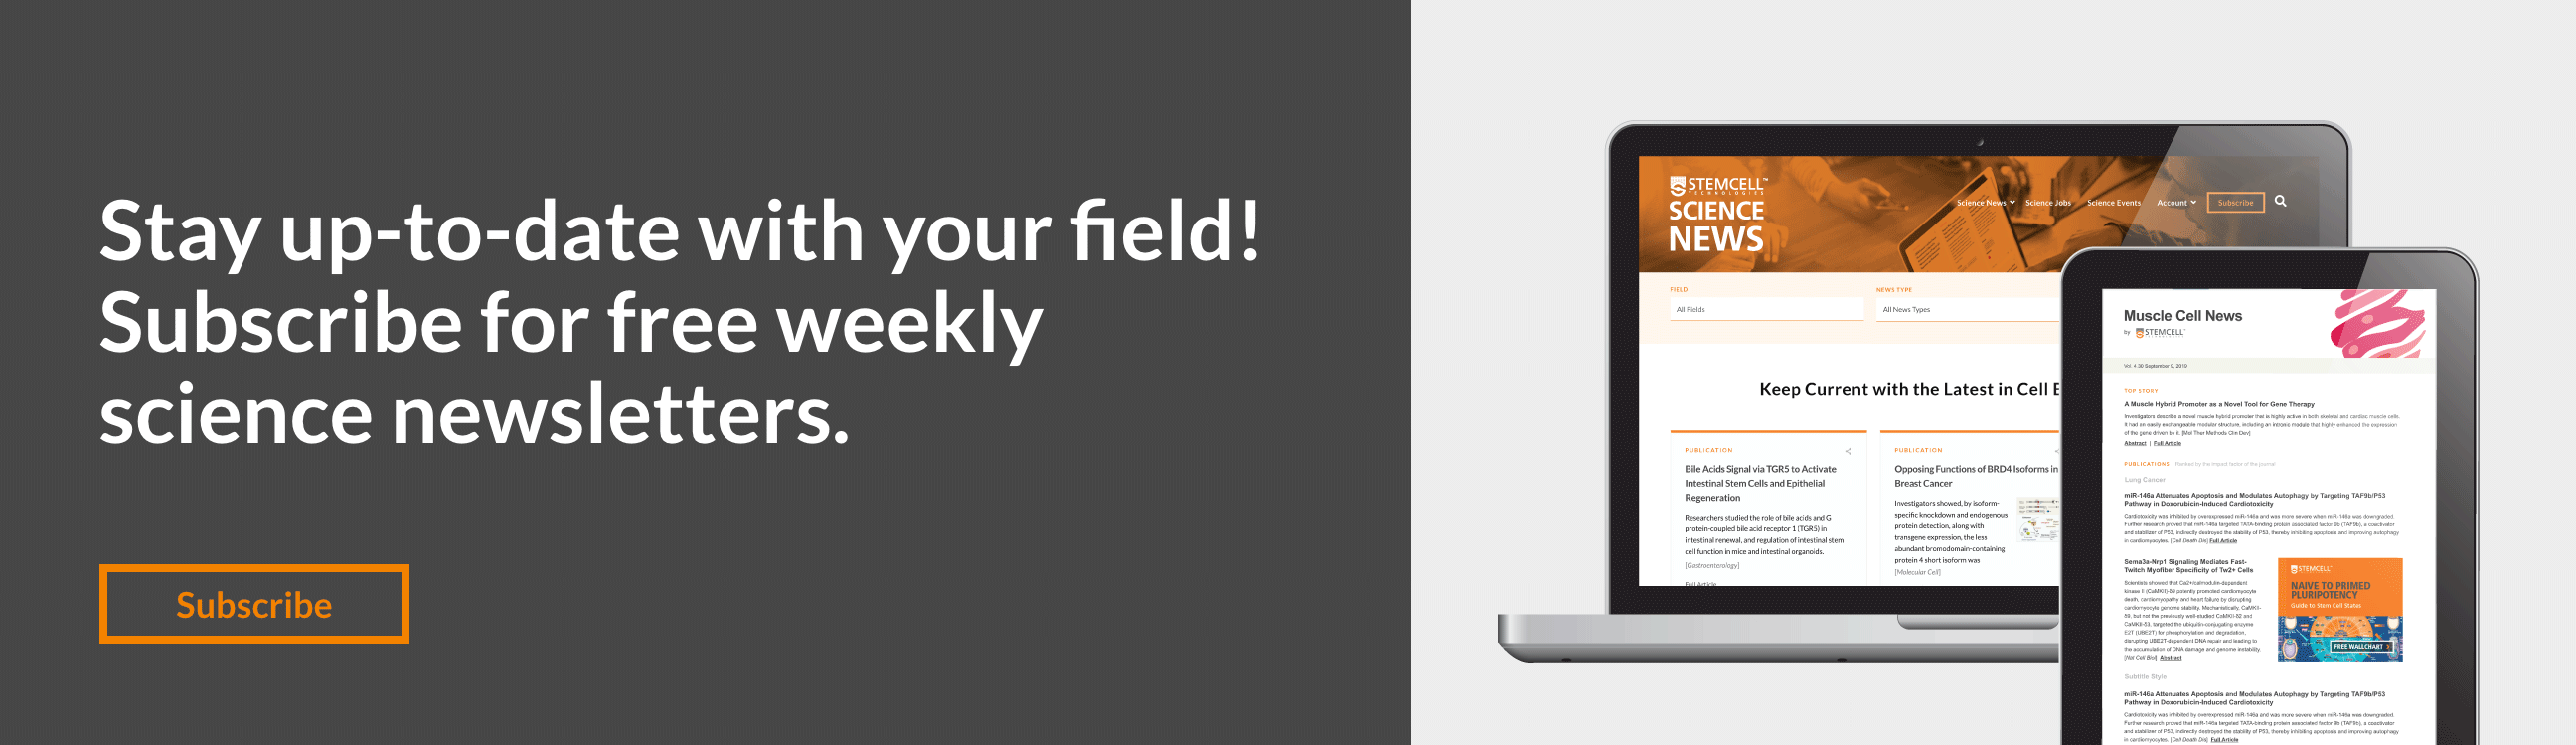 Stay up-to-date with your field! Subscribe for free weekly science newsletters